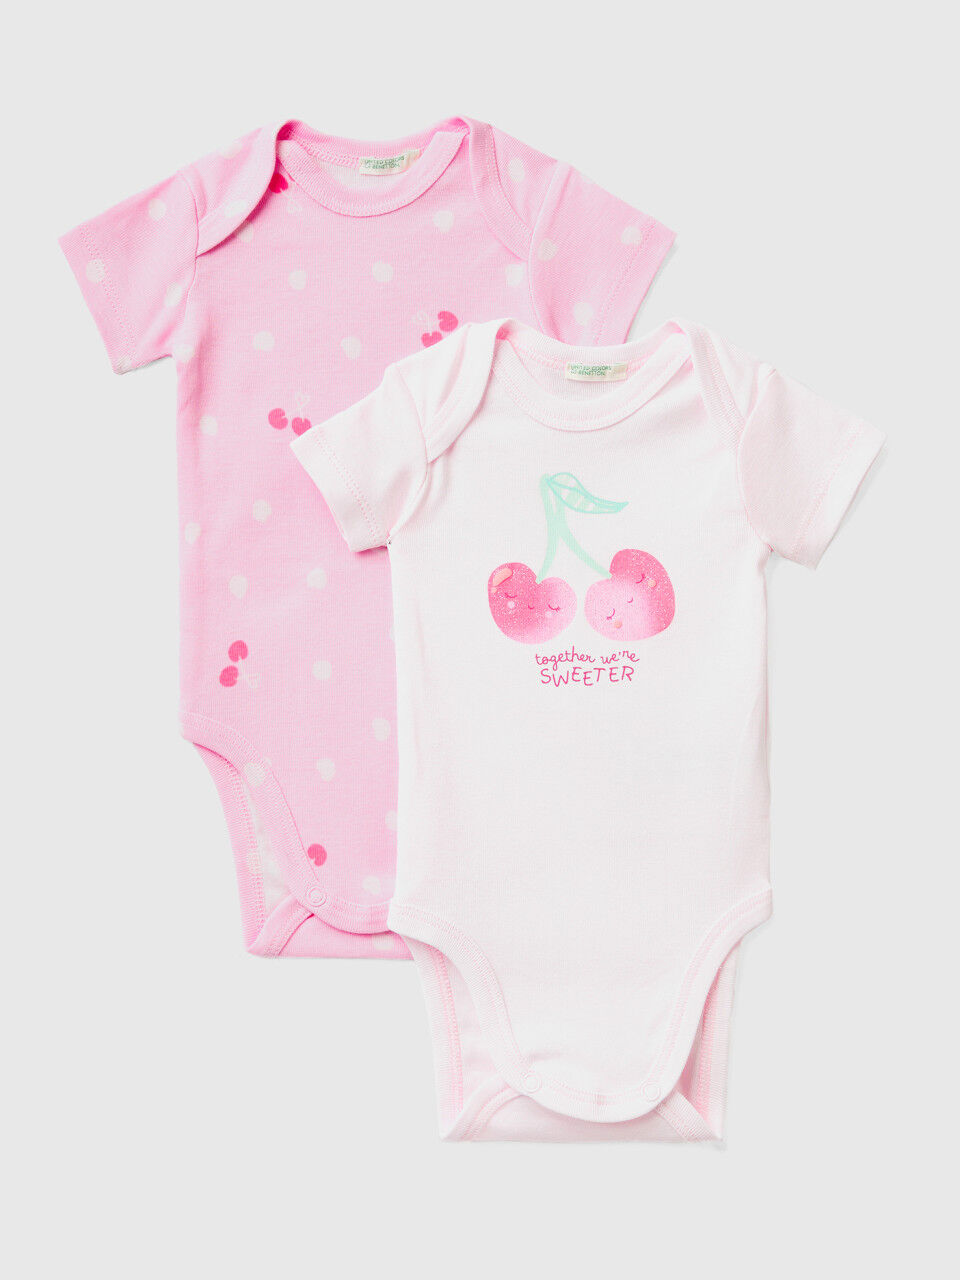 Two short sleeve bodysuits in organic cotton